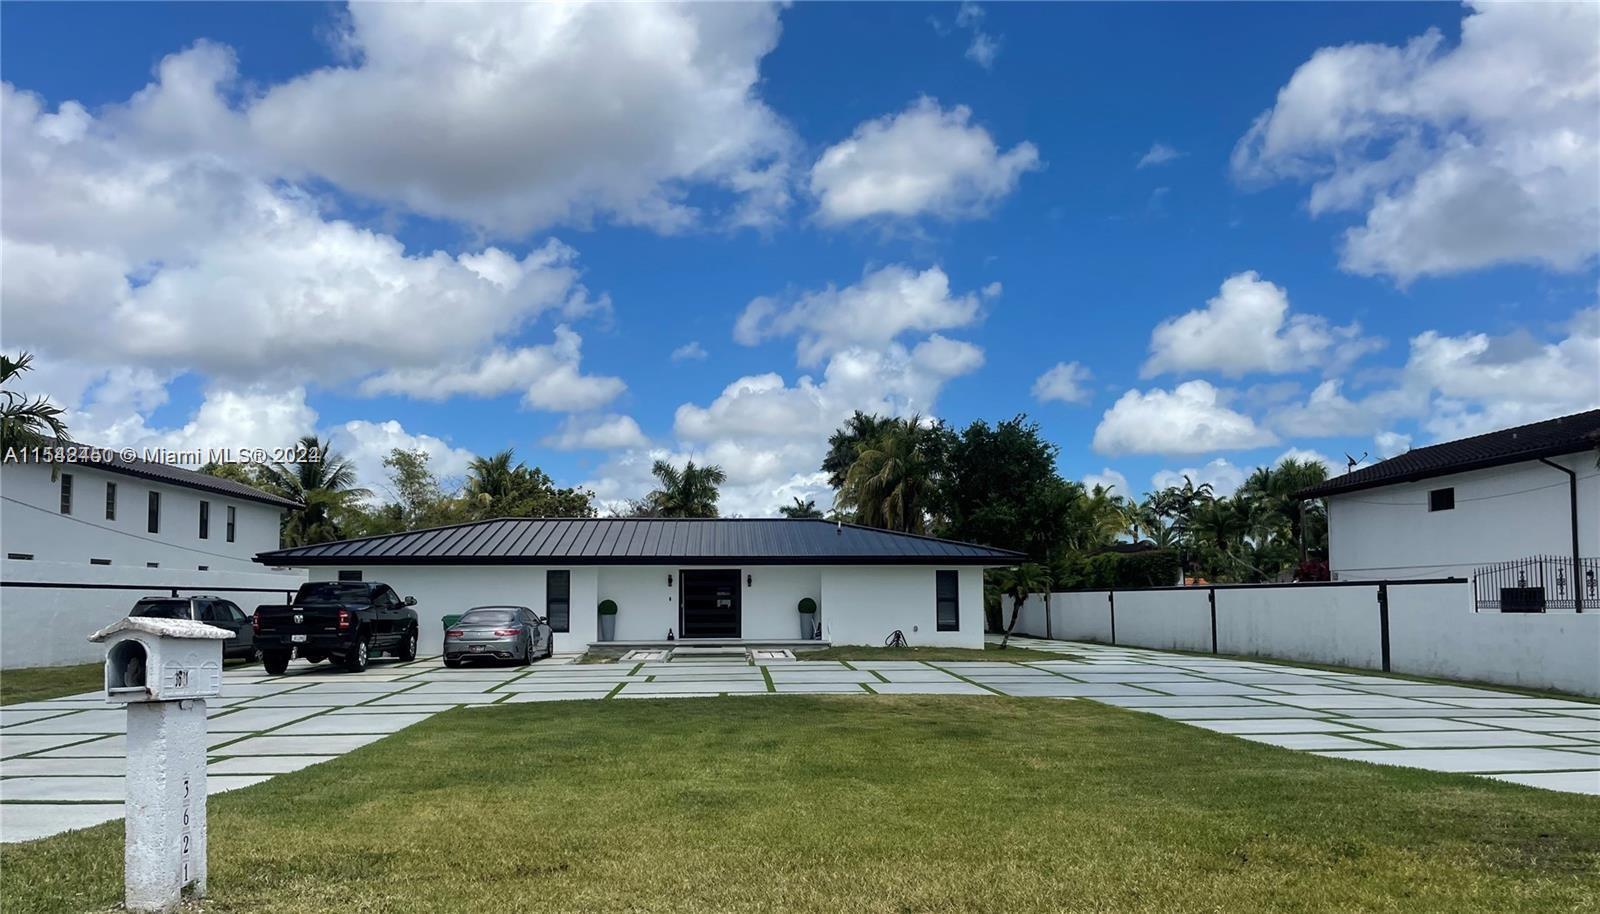 Photo of 3621 SW 132nd Ave in Miami, FL